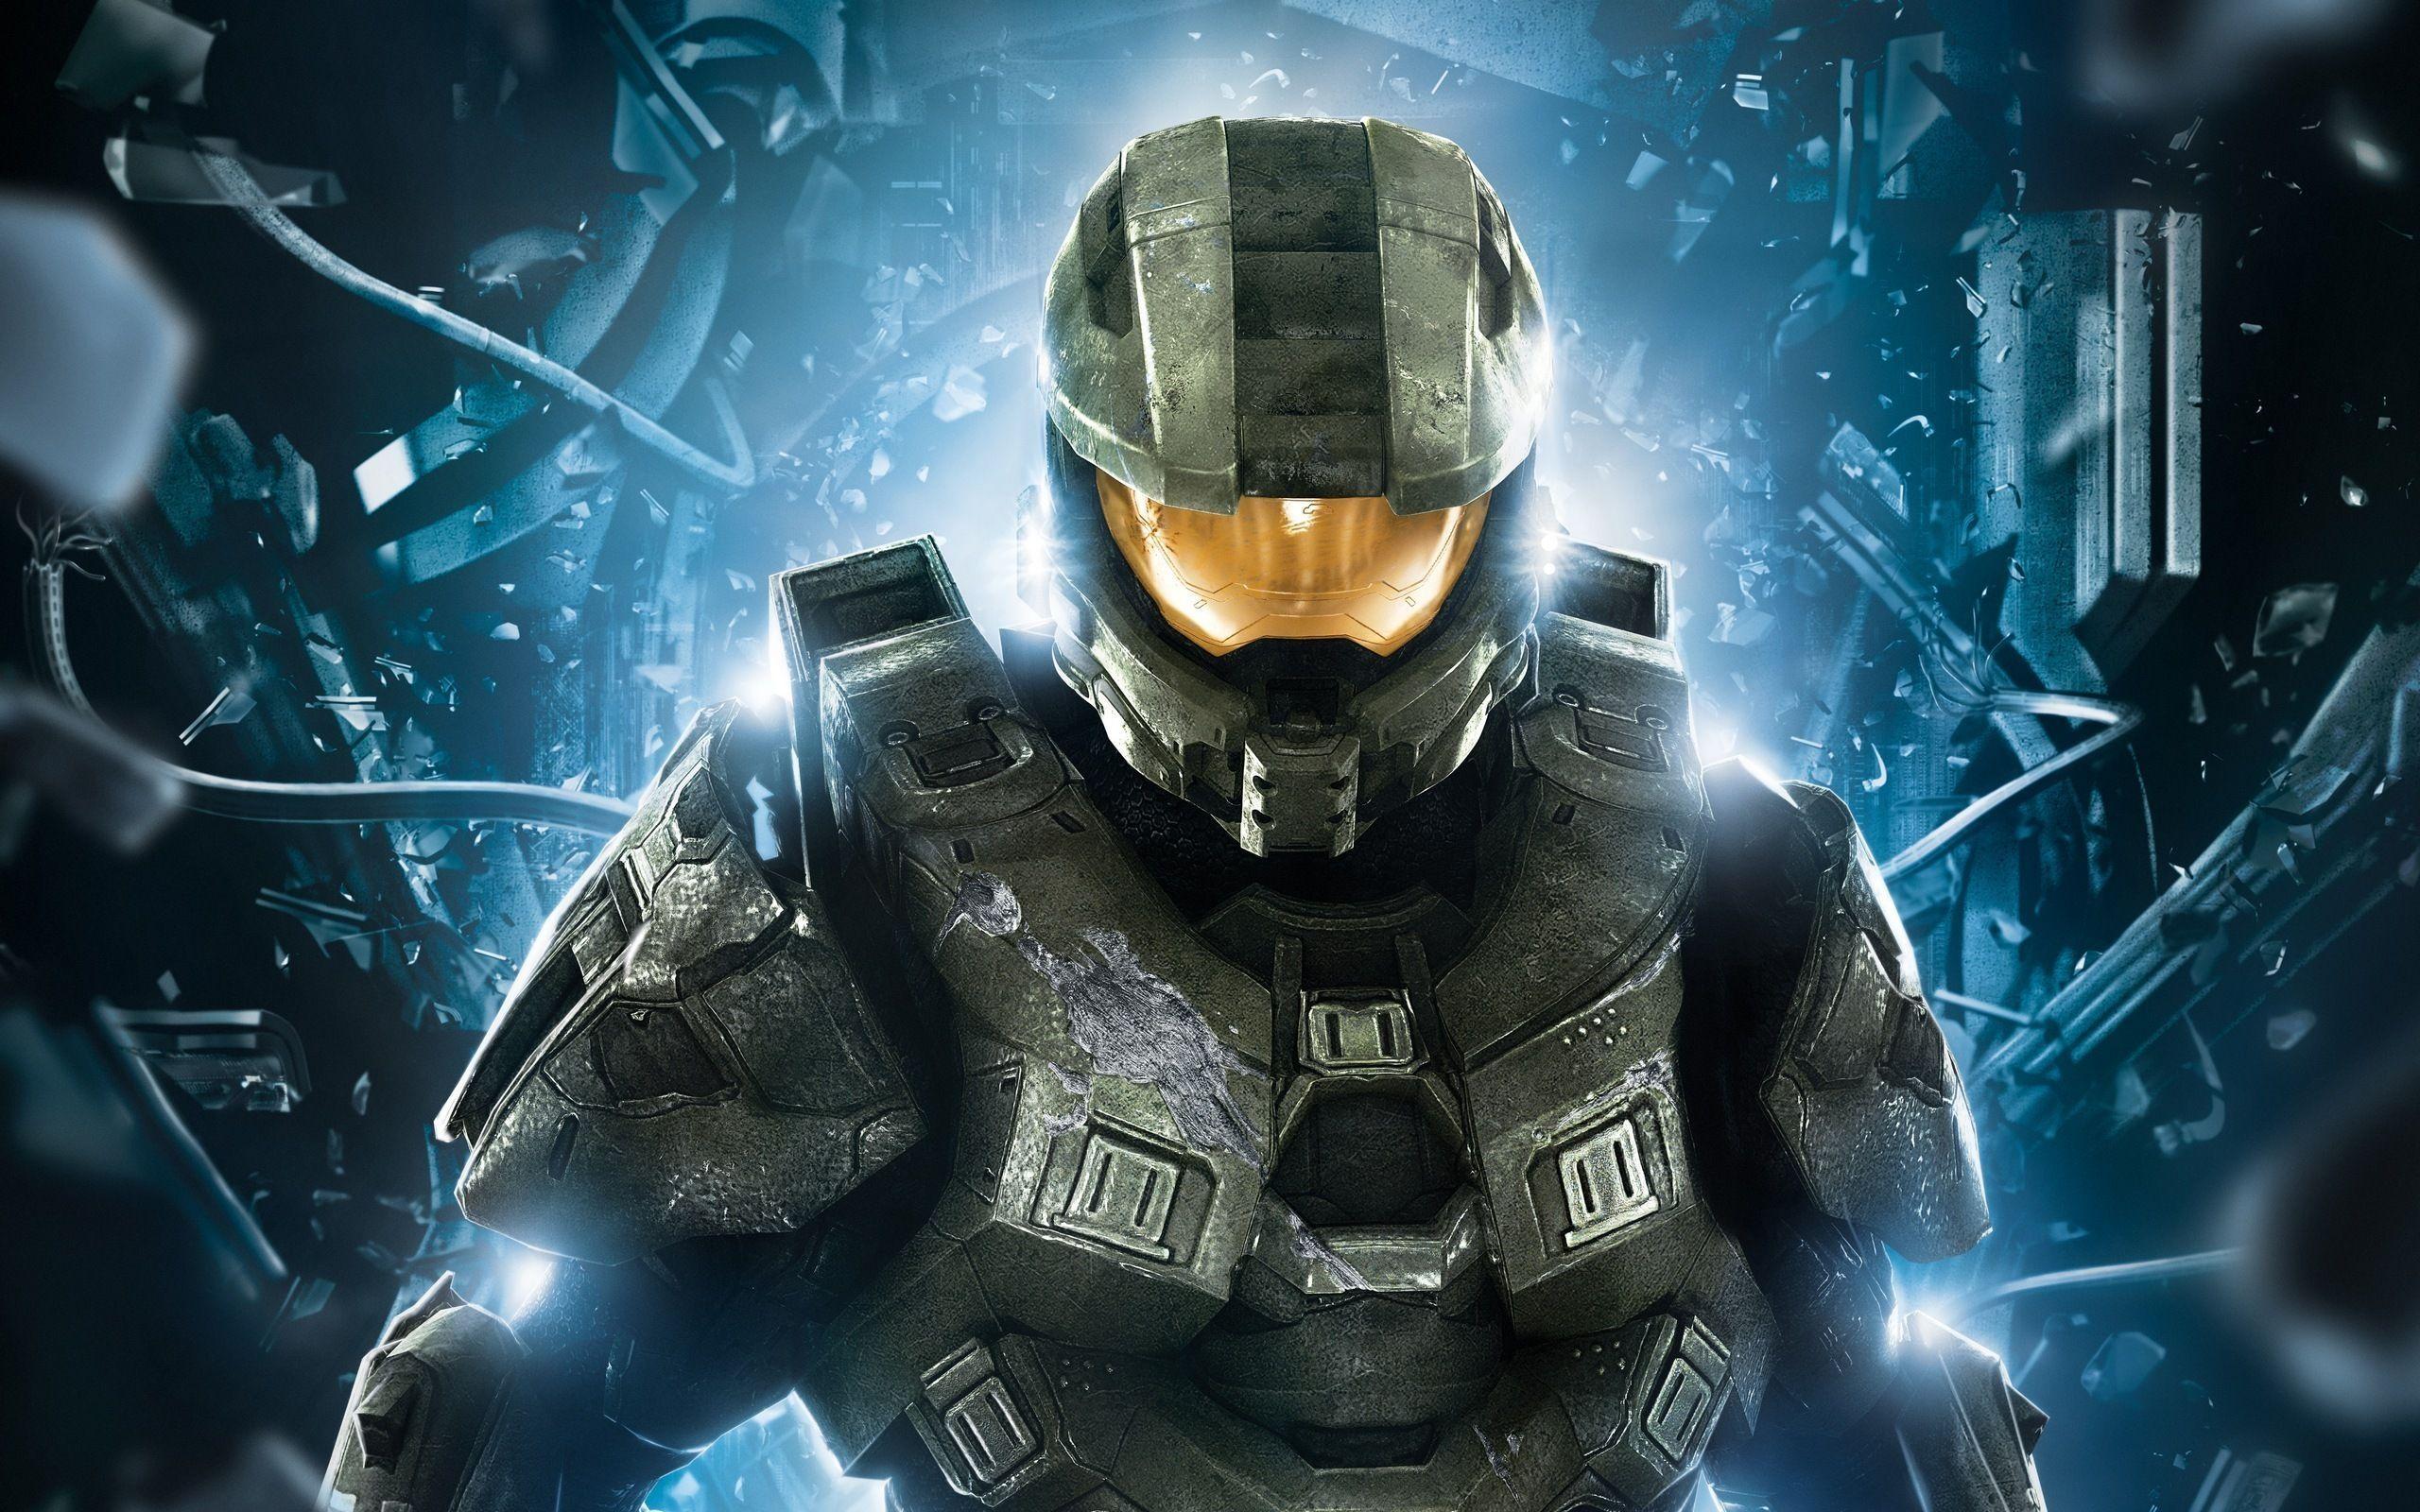 Super Cool Halo Xbox Background. Games Wallpaper